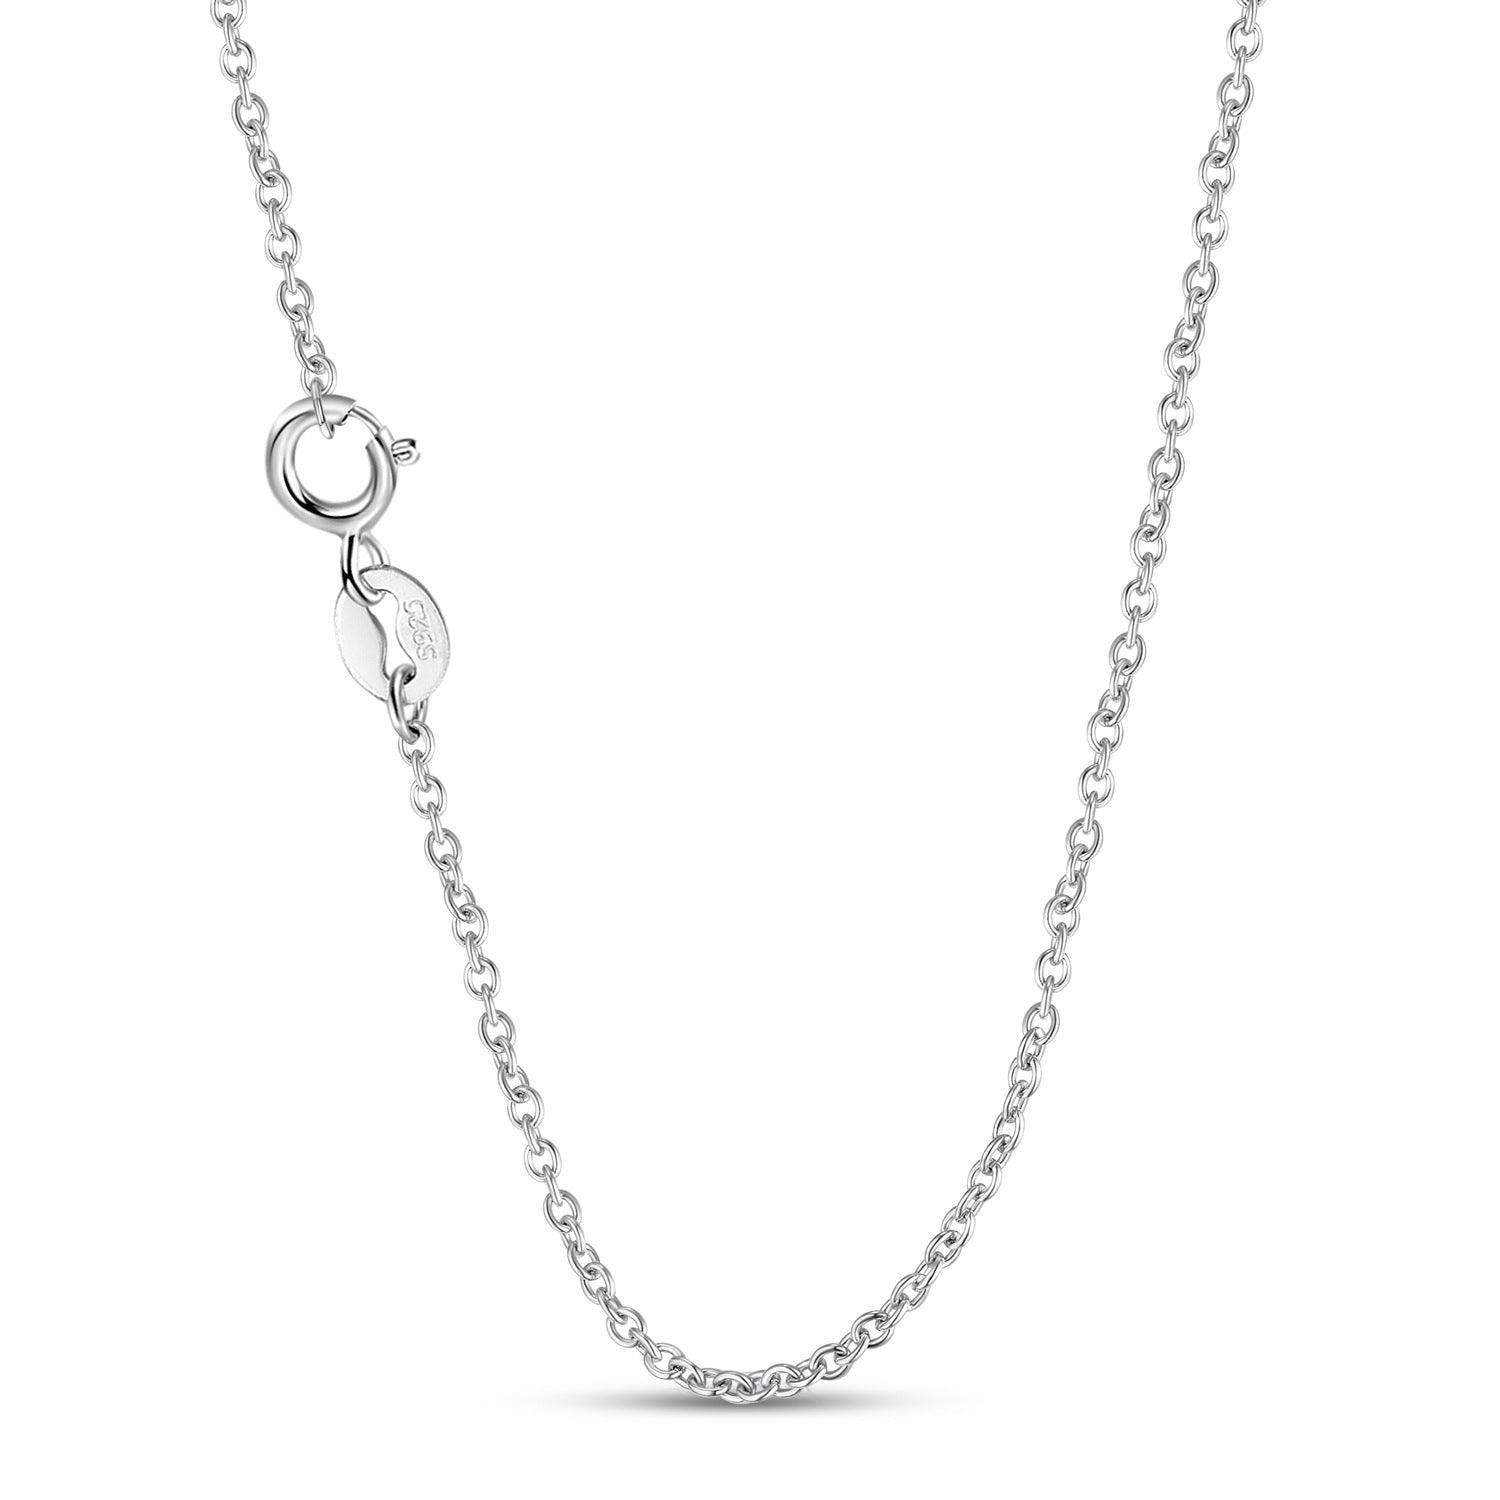 Sentimental Mended S925 Silver Heart Necklace in 2023 | Sentimental Mended S925 Silver Heart Necklace - undefined | S925 Silver Heart Necklace, S925 Sterling Silver Necklace, Sentimental Mended Necklace | From Hunny Life | hunnylife.com